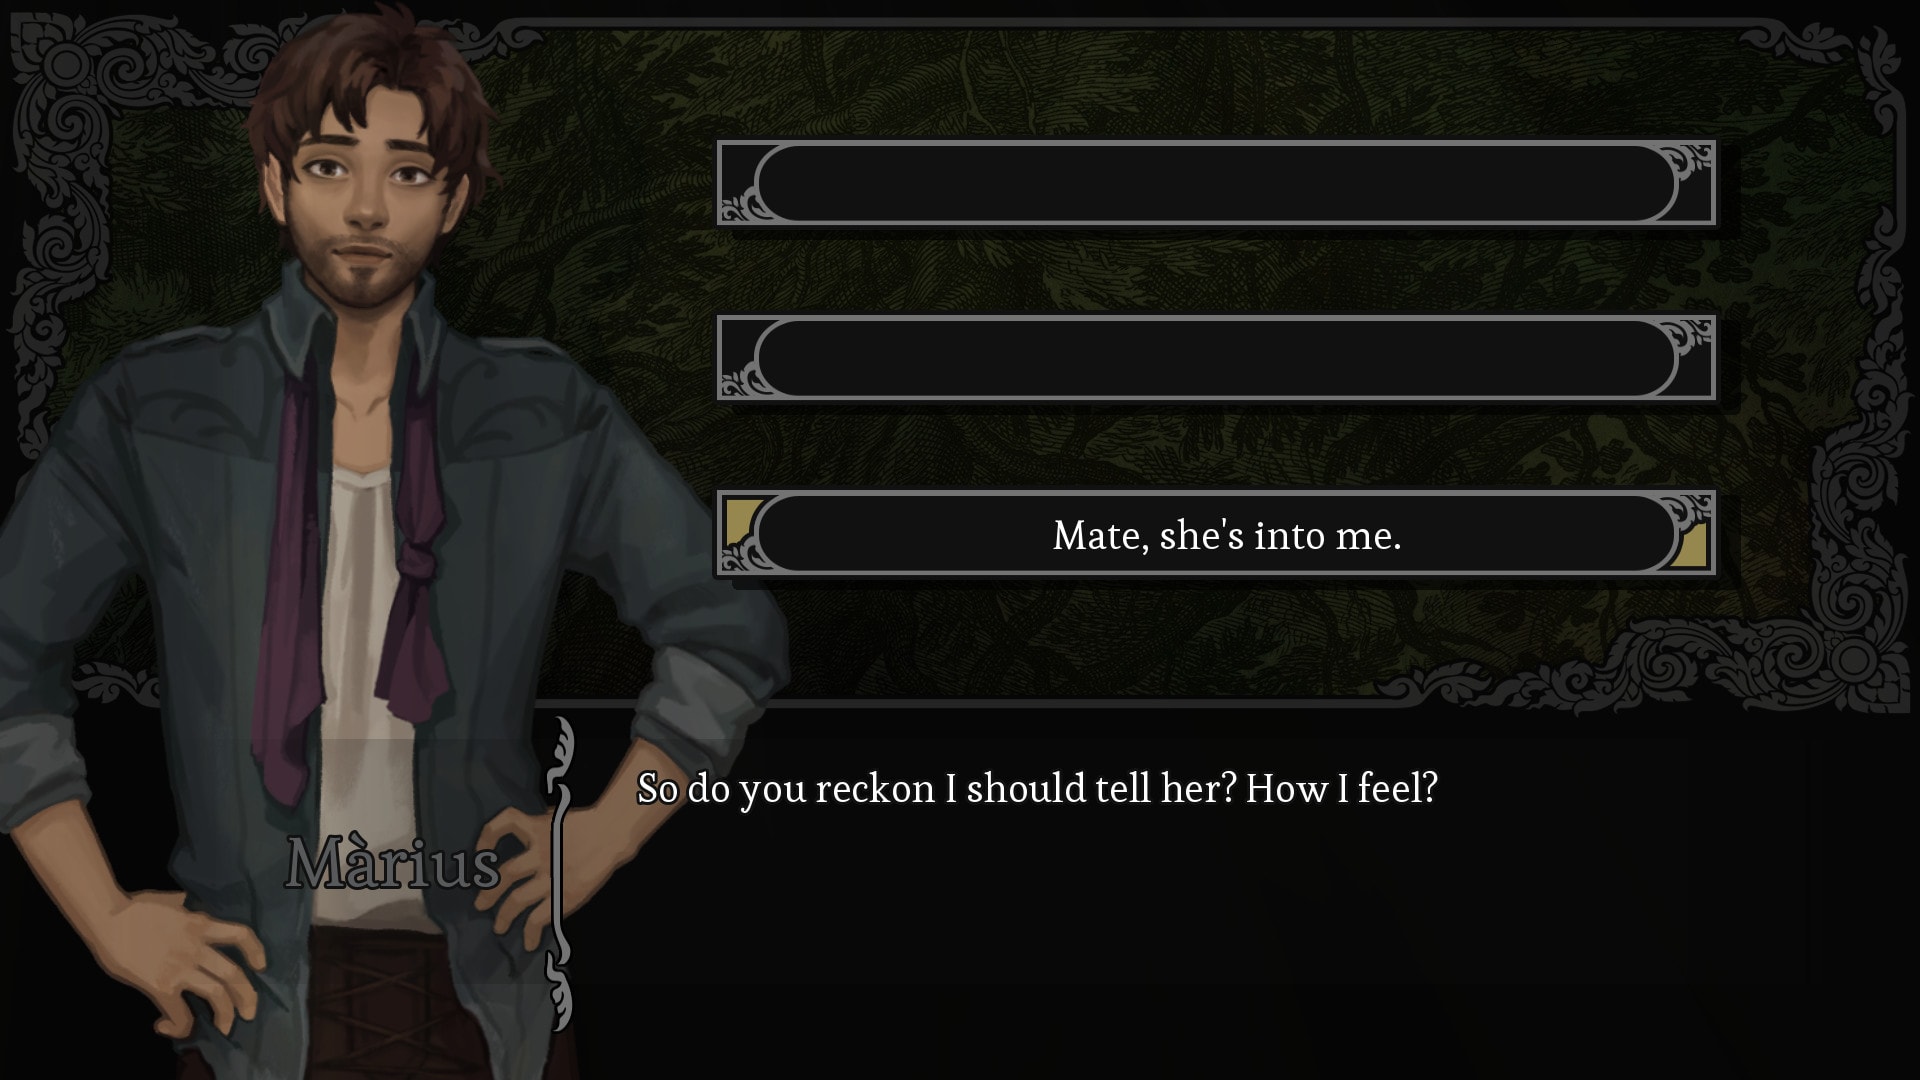 Amarantus screenshot of Marius asking Arik if he should reveal his feelings about someone with the Arik dialogue choice highlighted saying "mate she's into me"